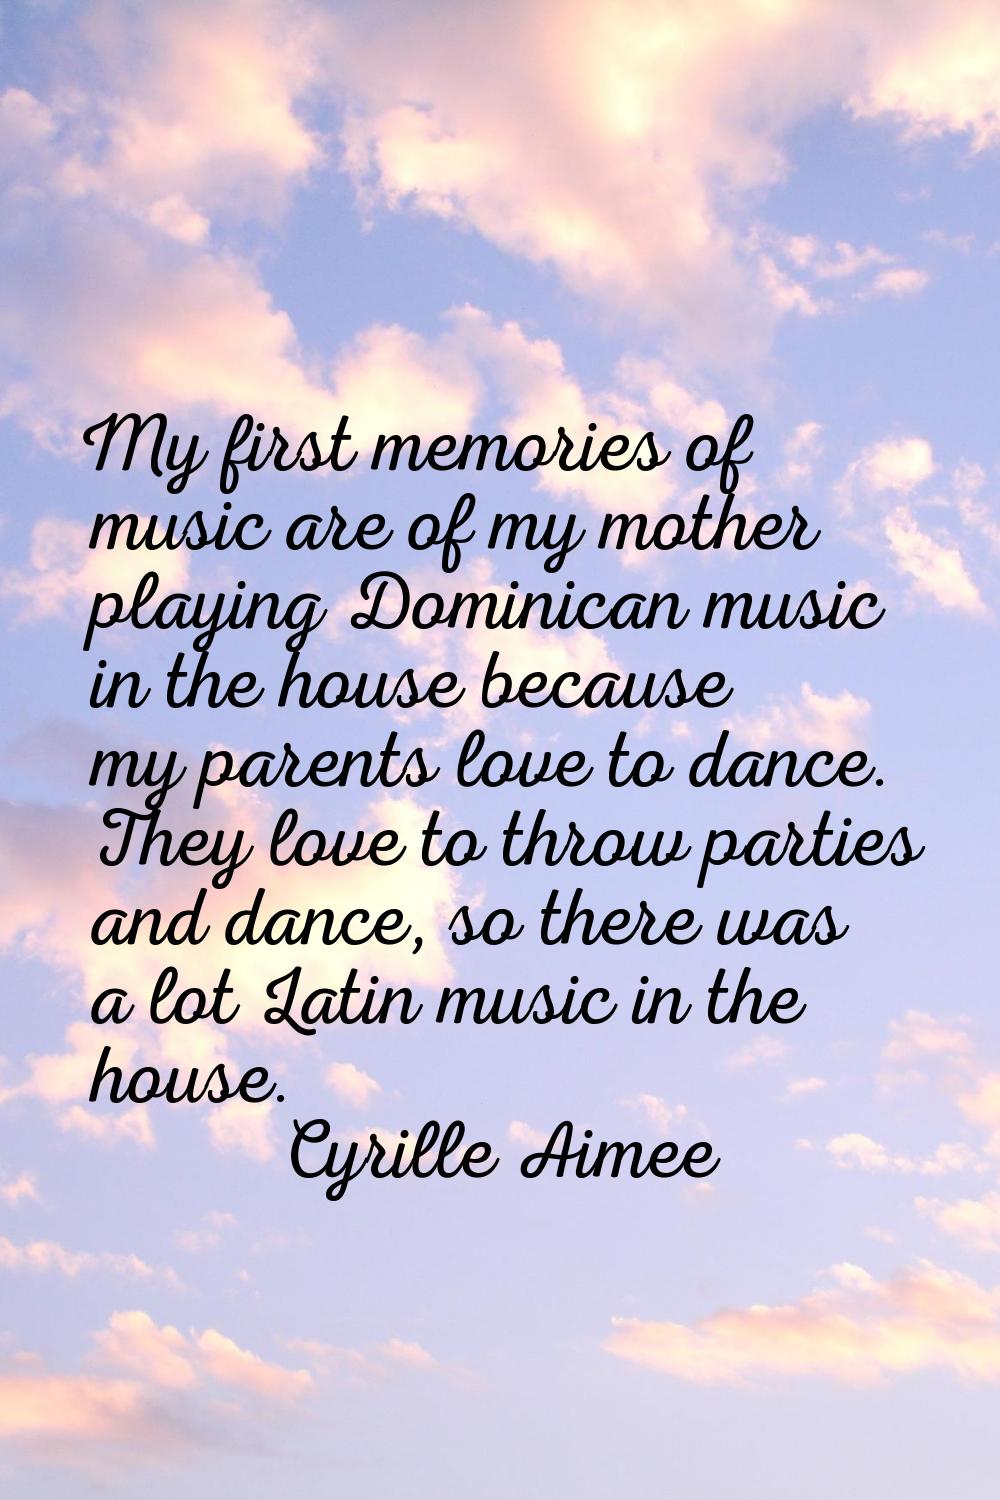 My first memories of music are of my mother playing Dominican music in the house because my parents